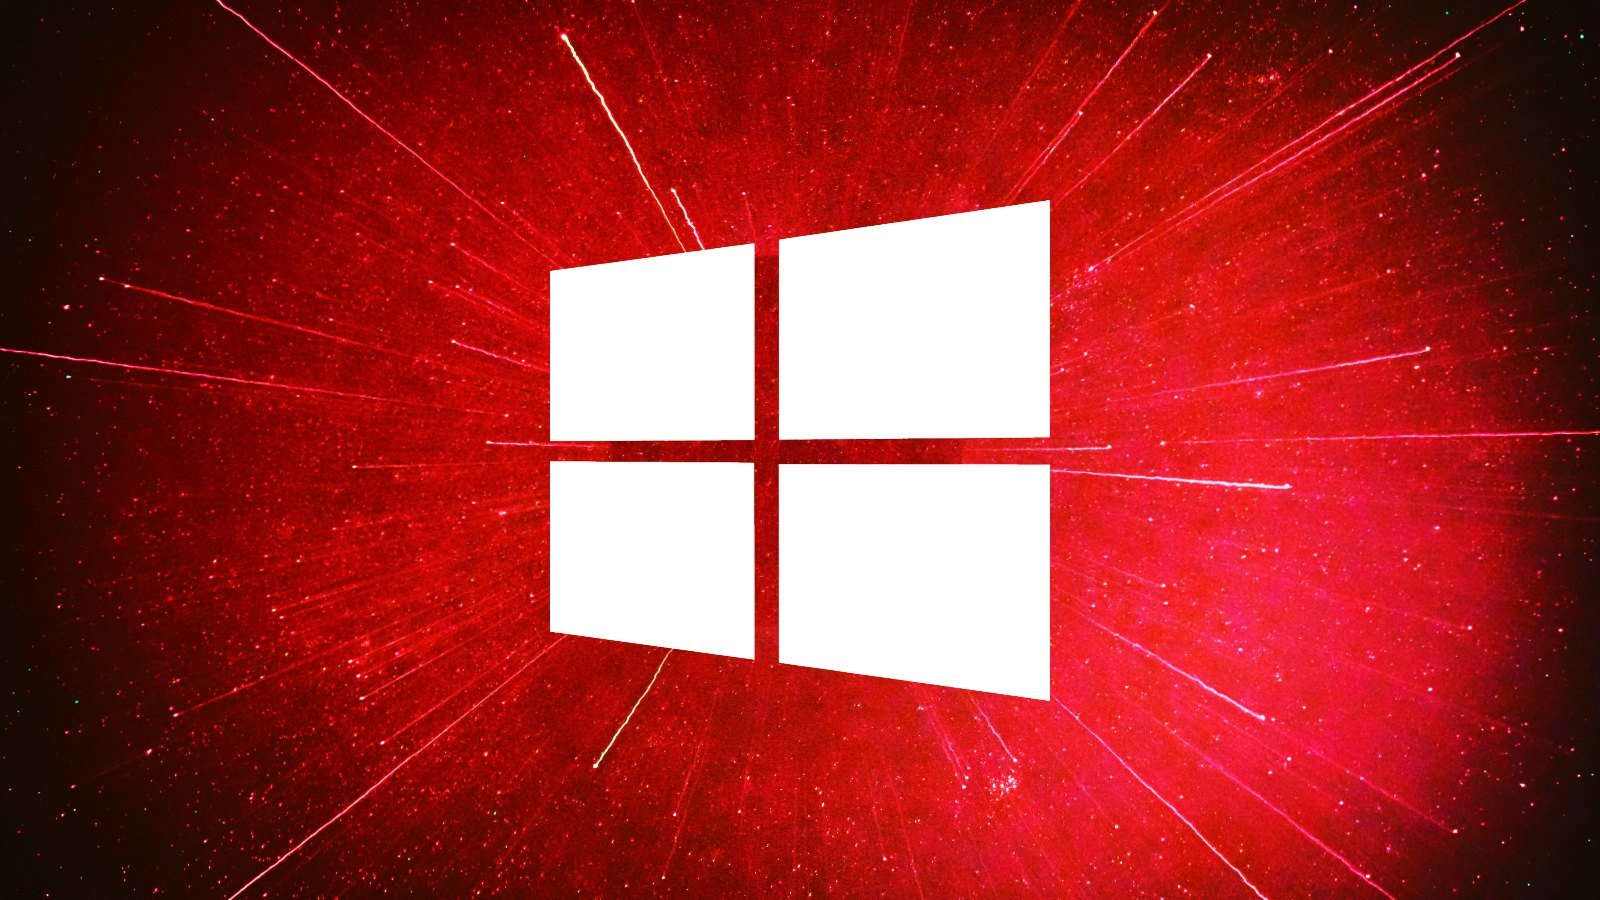 Windows logo on a red background